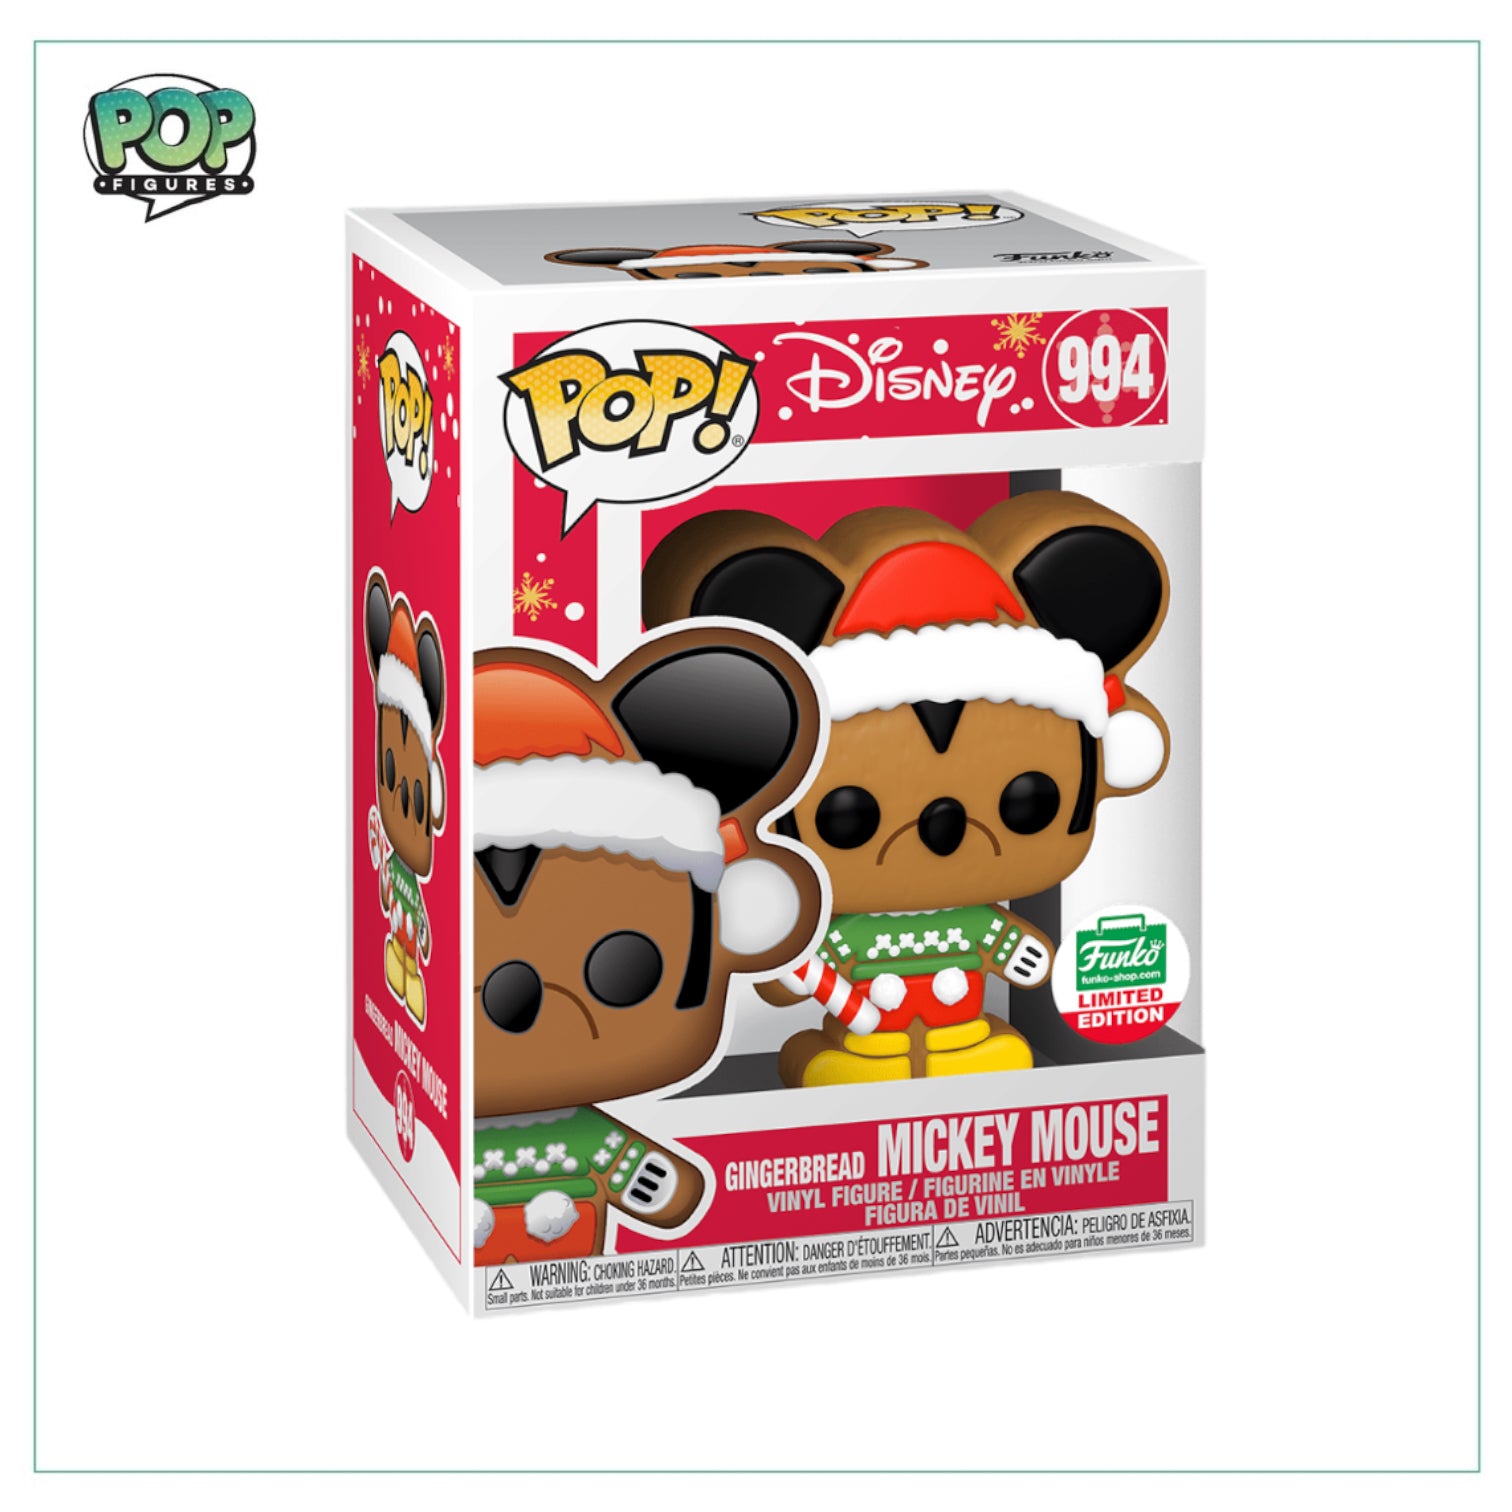 Gingerbread Mickey Mouse #994 Funko Pop! Disney, Funko Limited Edition